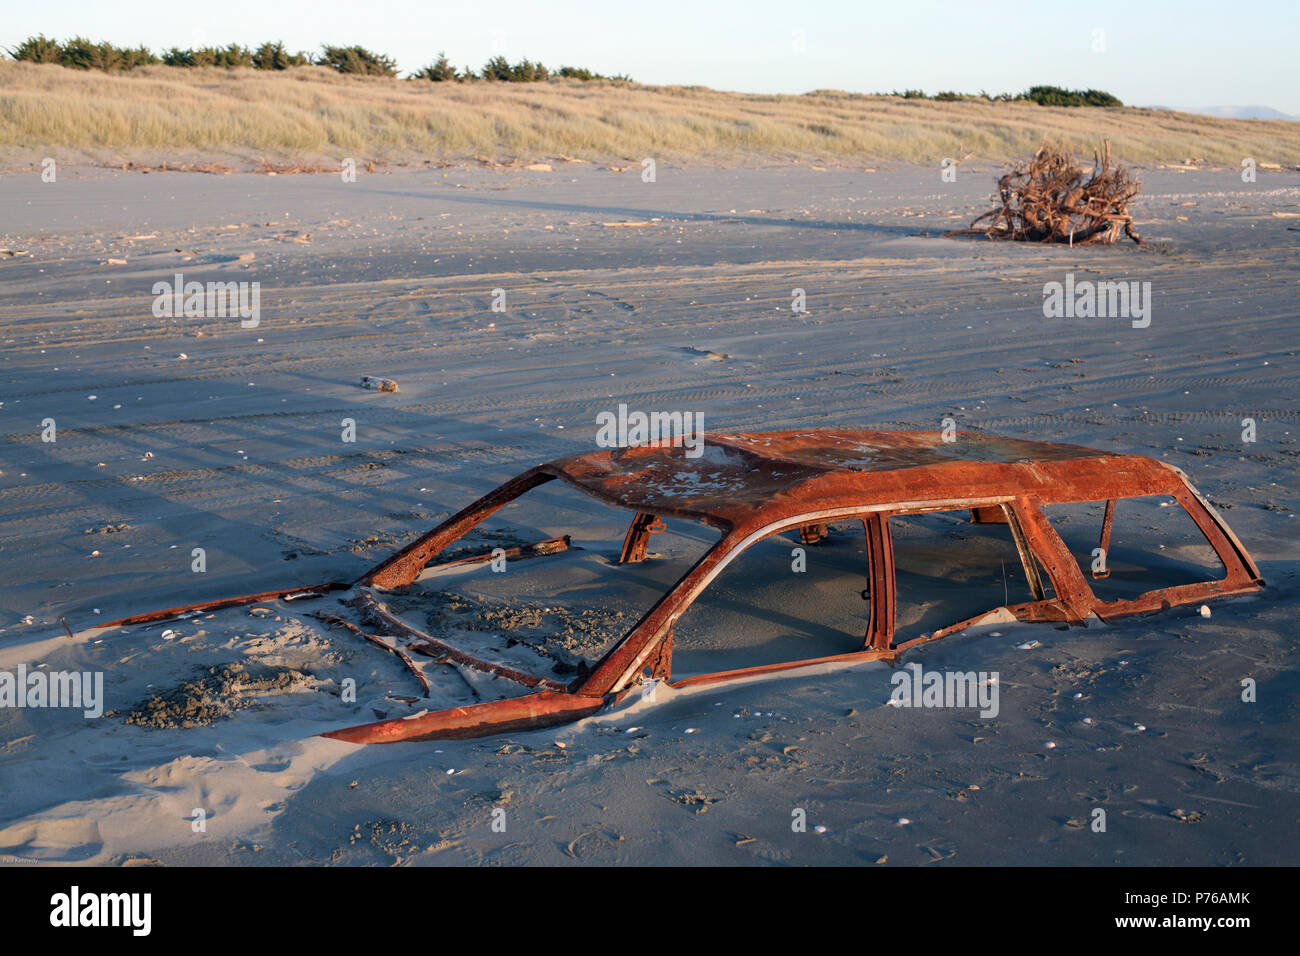 Rusted car wreck buried in sand on beach Stock Photo